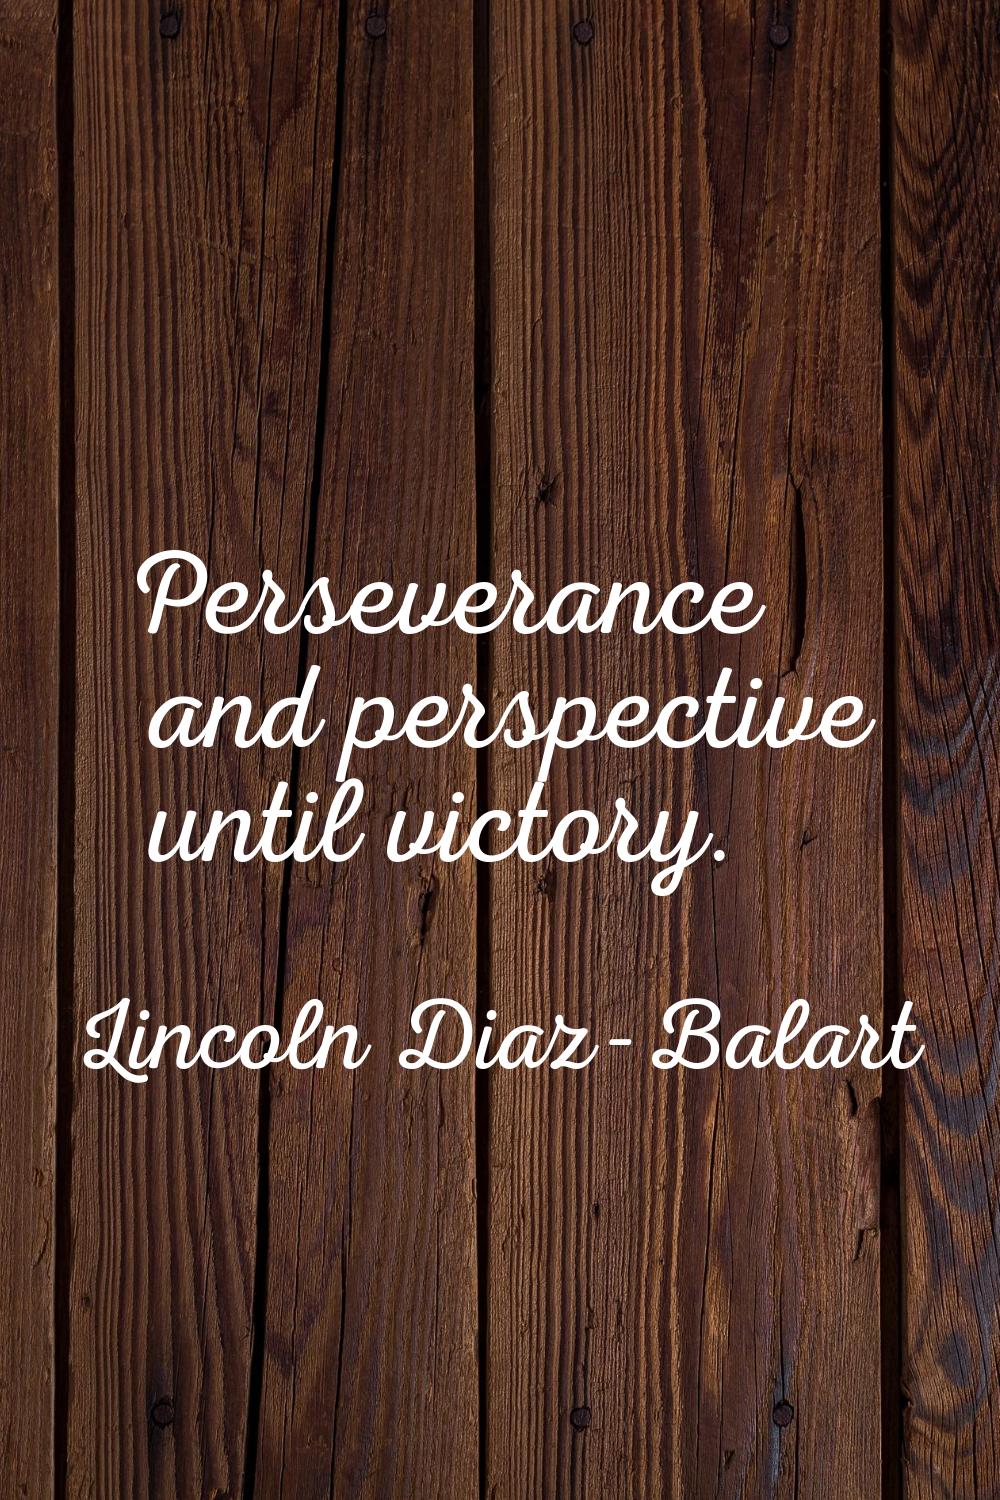 Perseverance and perspective until victory.